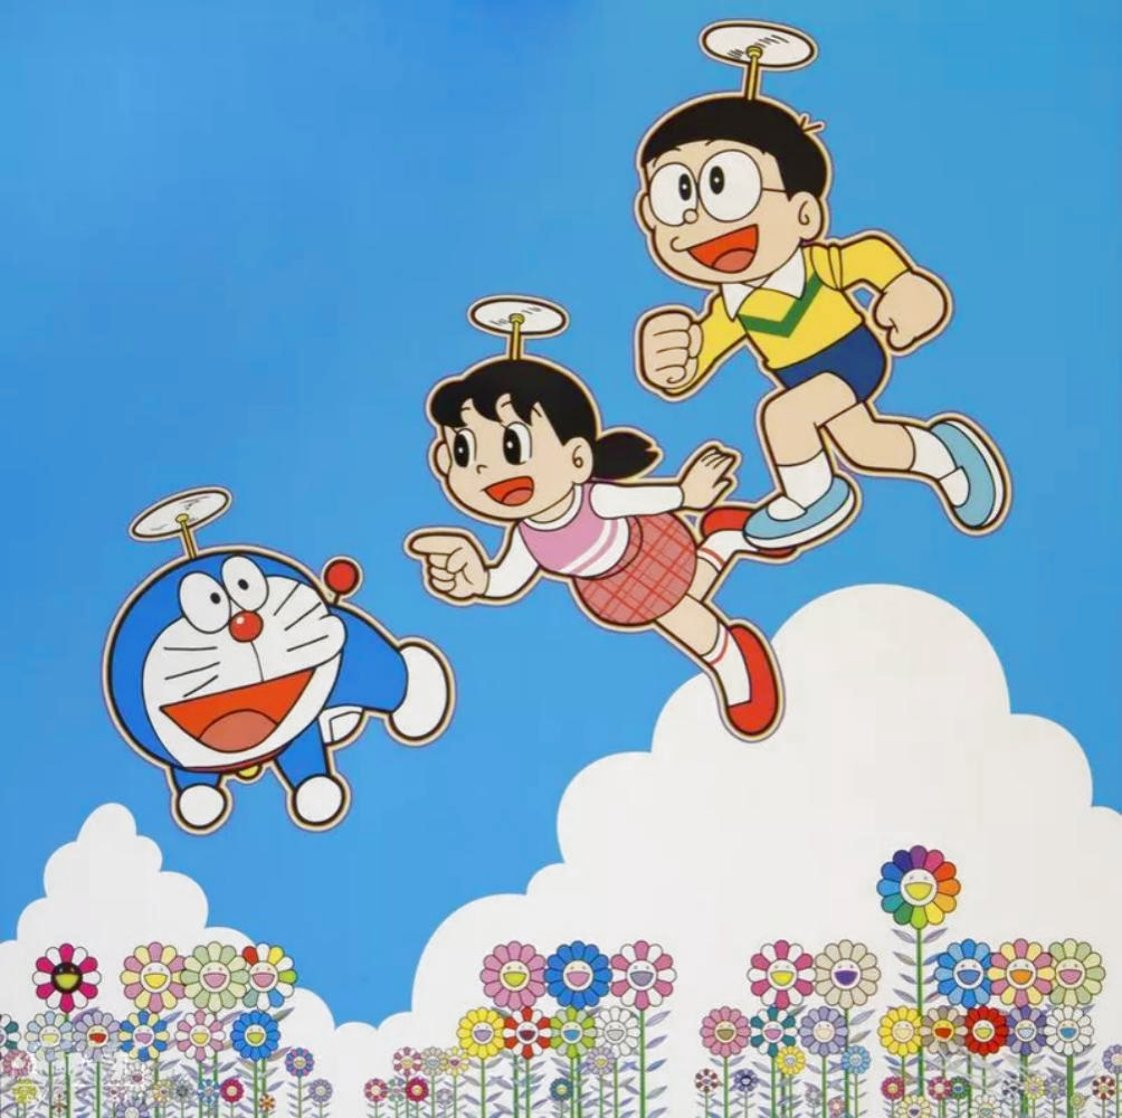 Blue Sky! Like We Could Go on Forever 2020 Limited Edition Print by Takashi Murakami